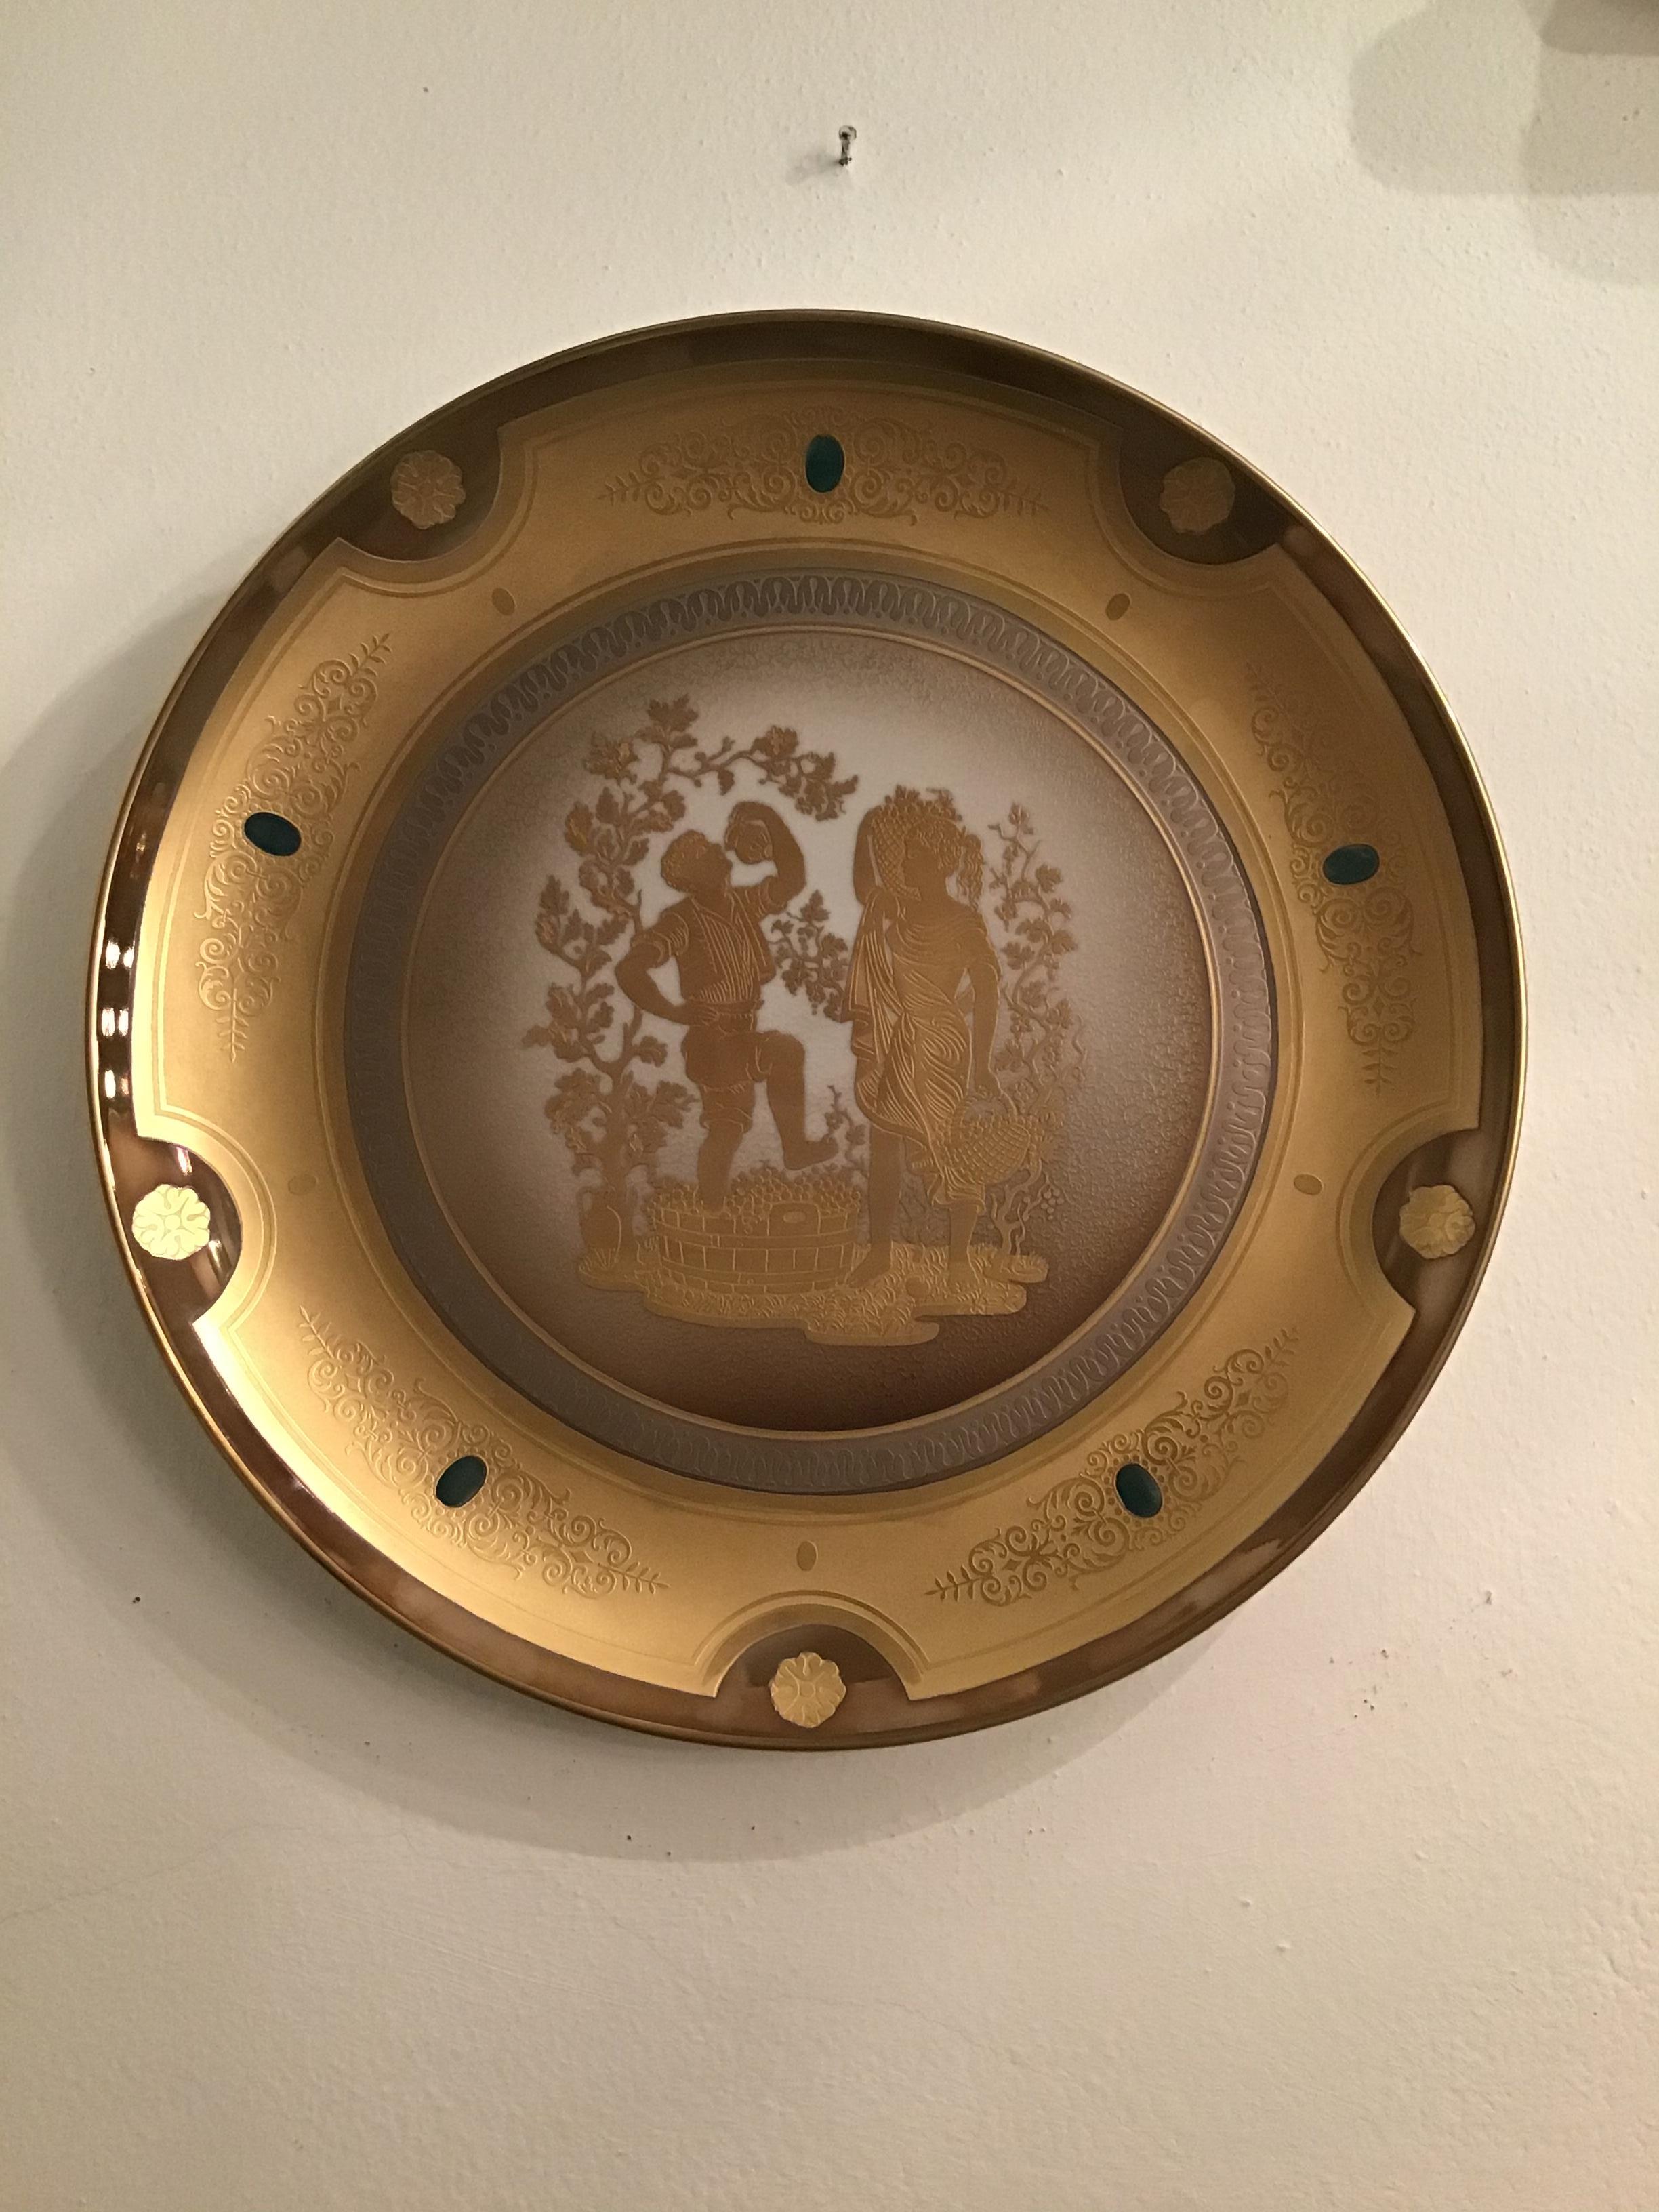 Morbelli Porcelain Wall Plate Gold “ Autunno”, 1960, Italy For Sale 6